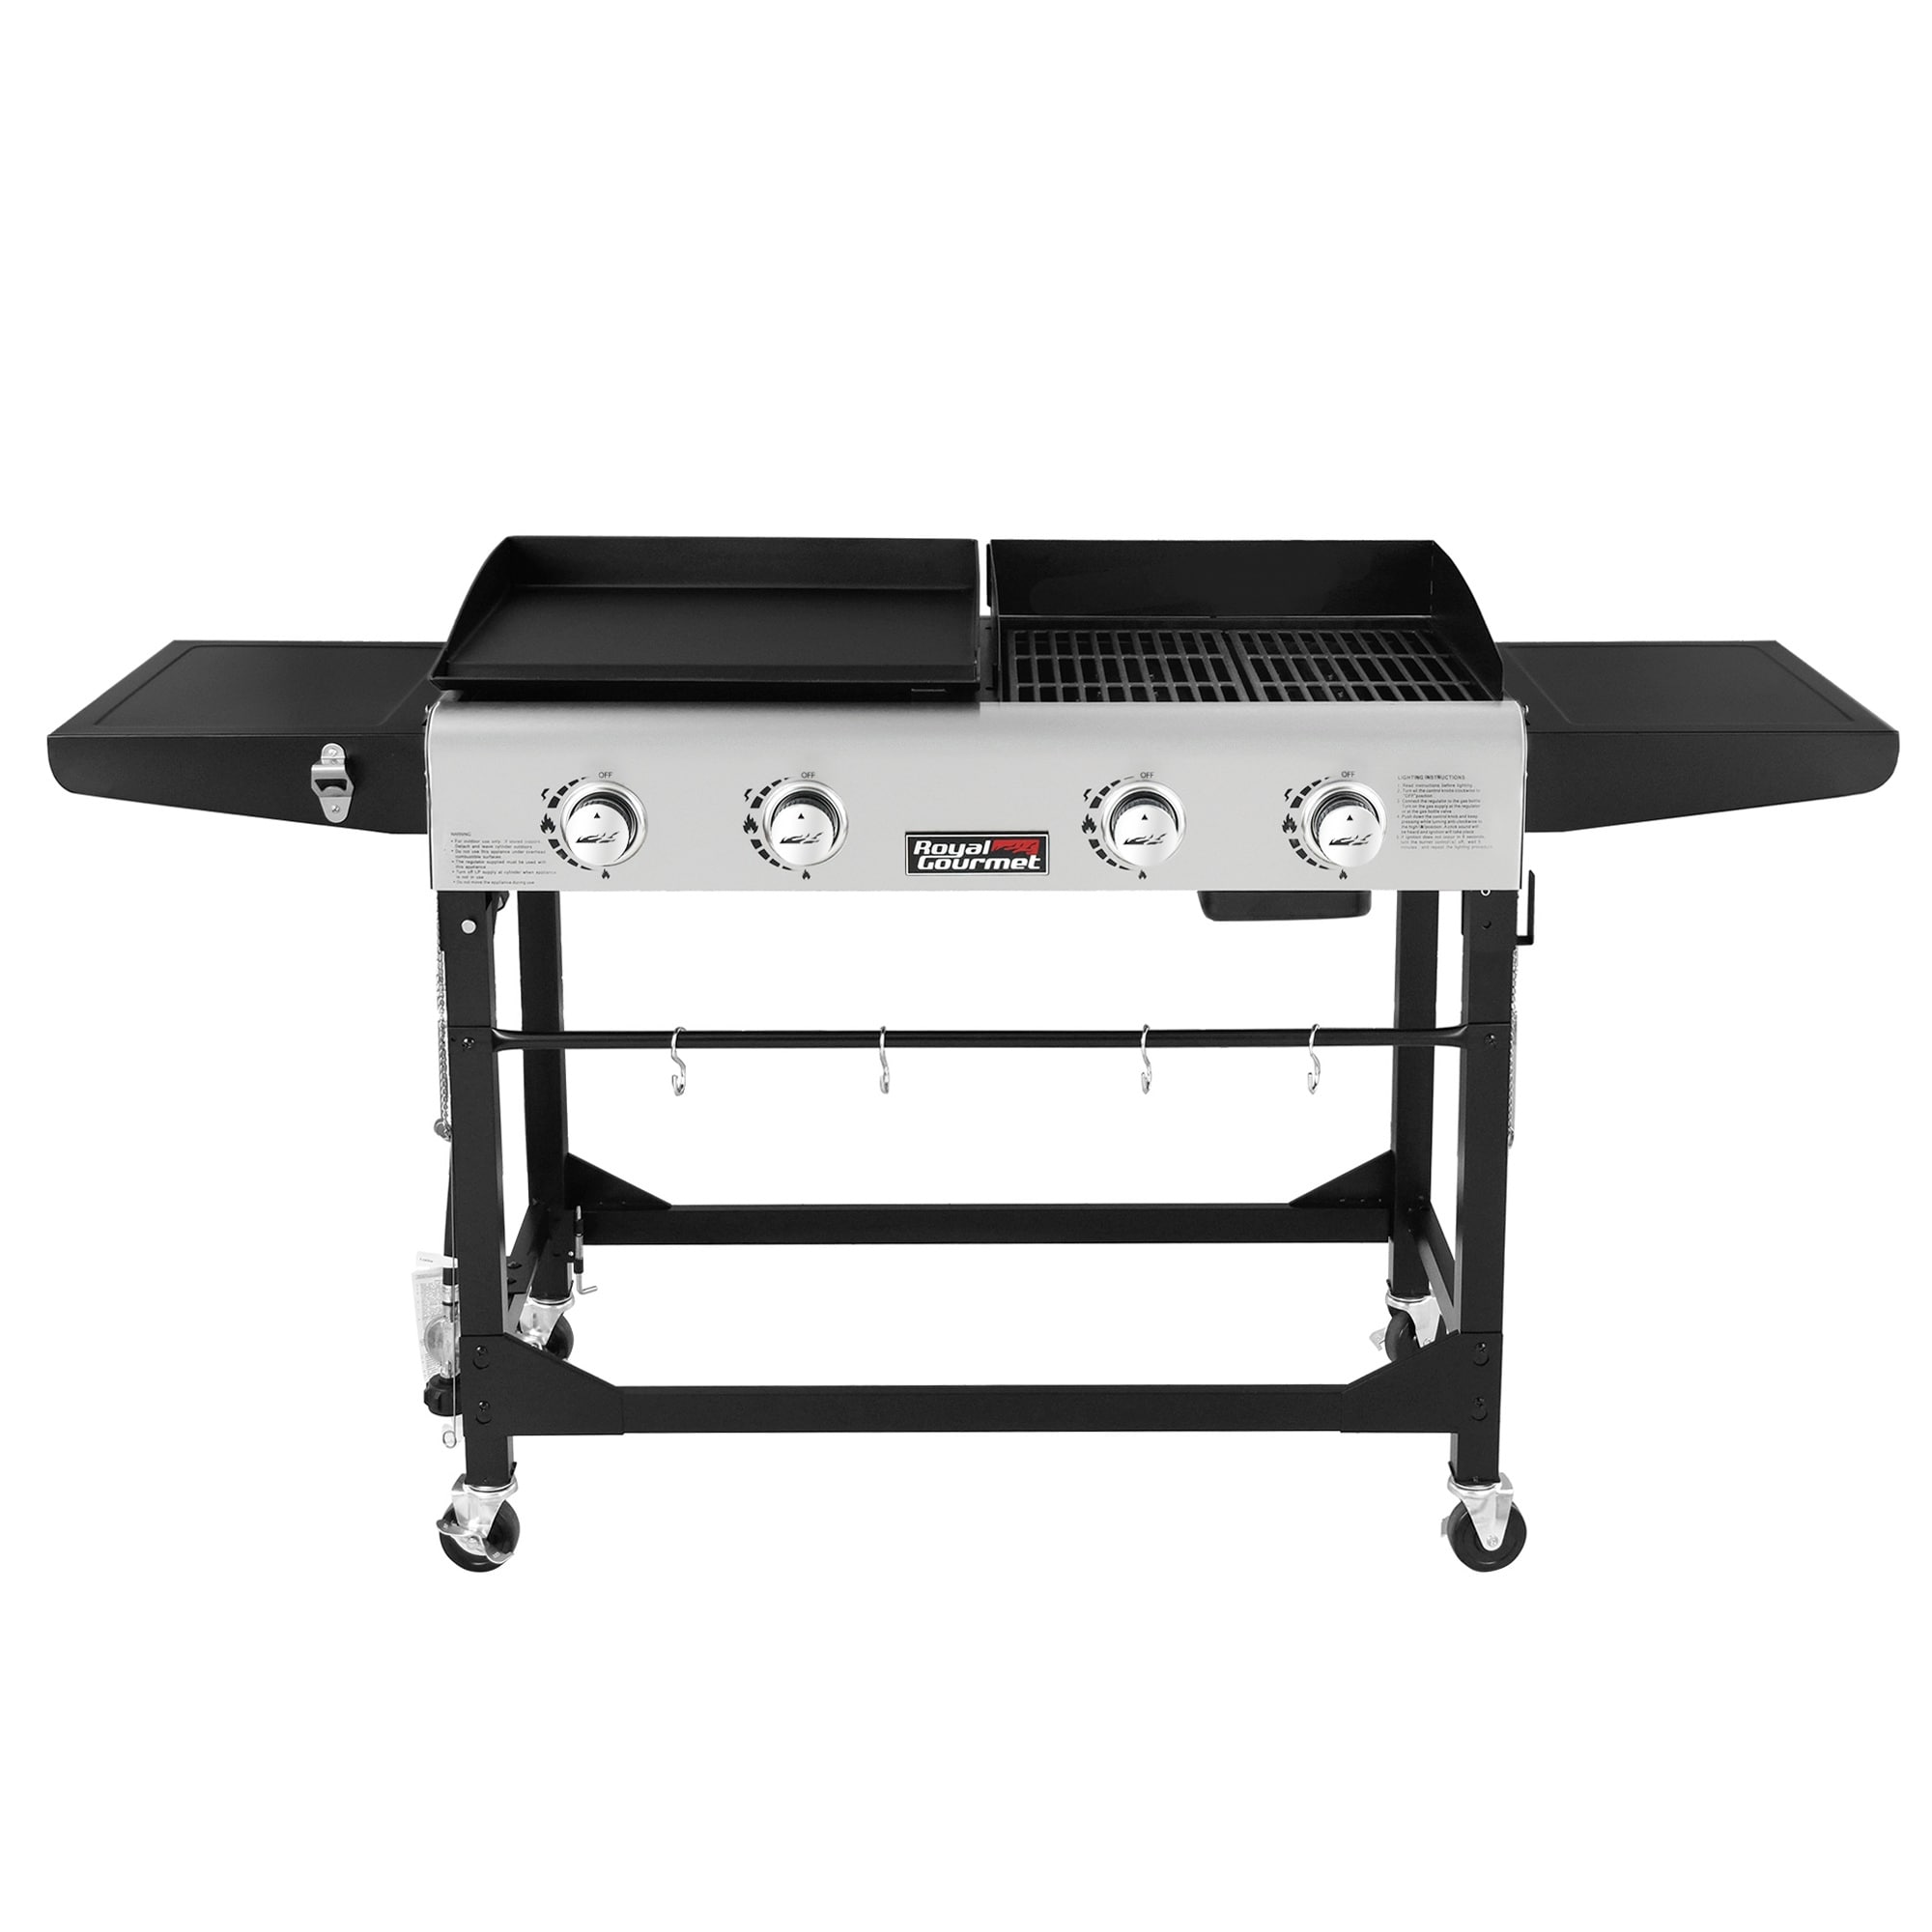 Royal Gourmet 4-burner Portable Flat Top Gas Grill And Griddle Combo With Folding Legs  Black and Silver